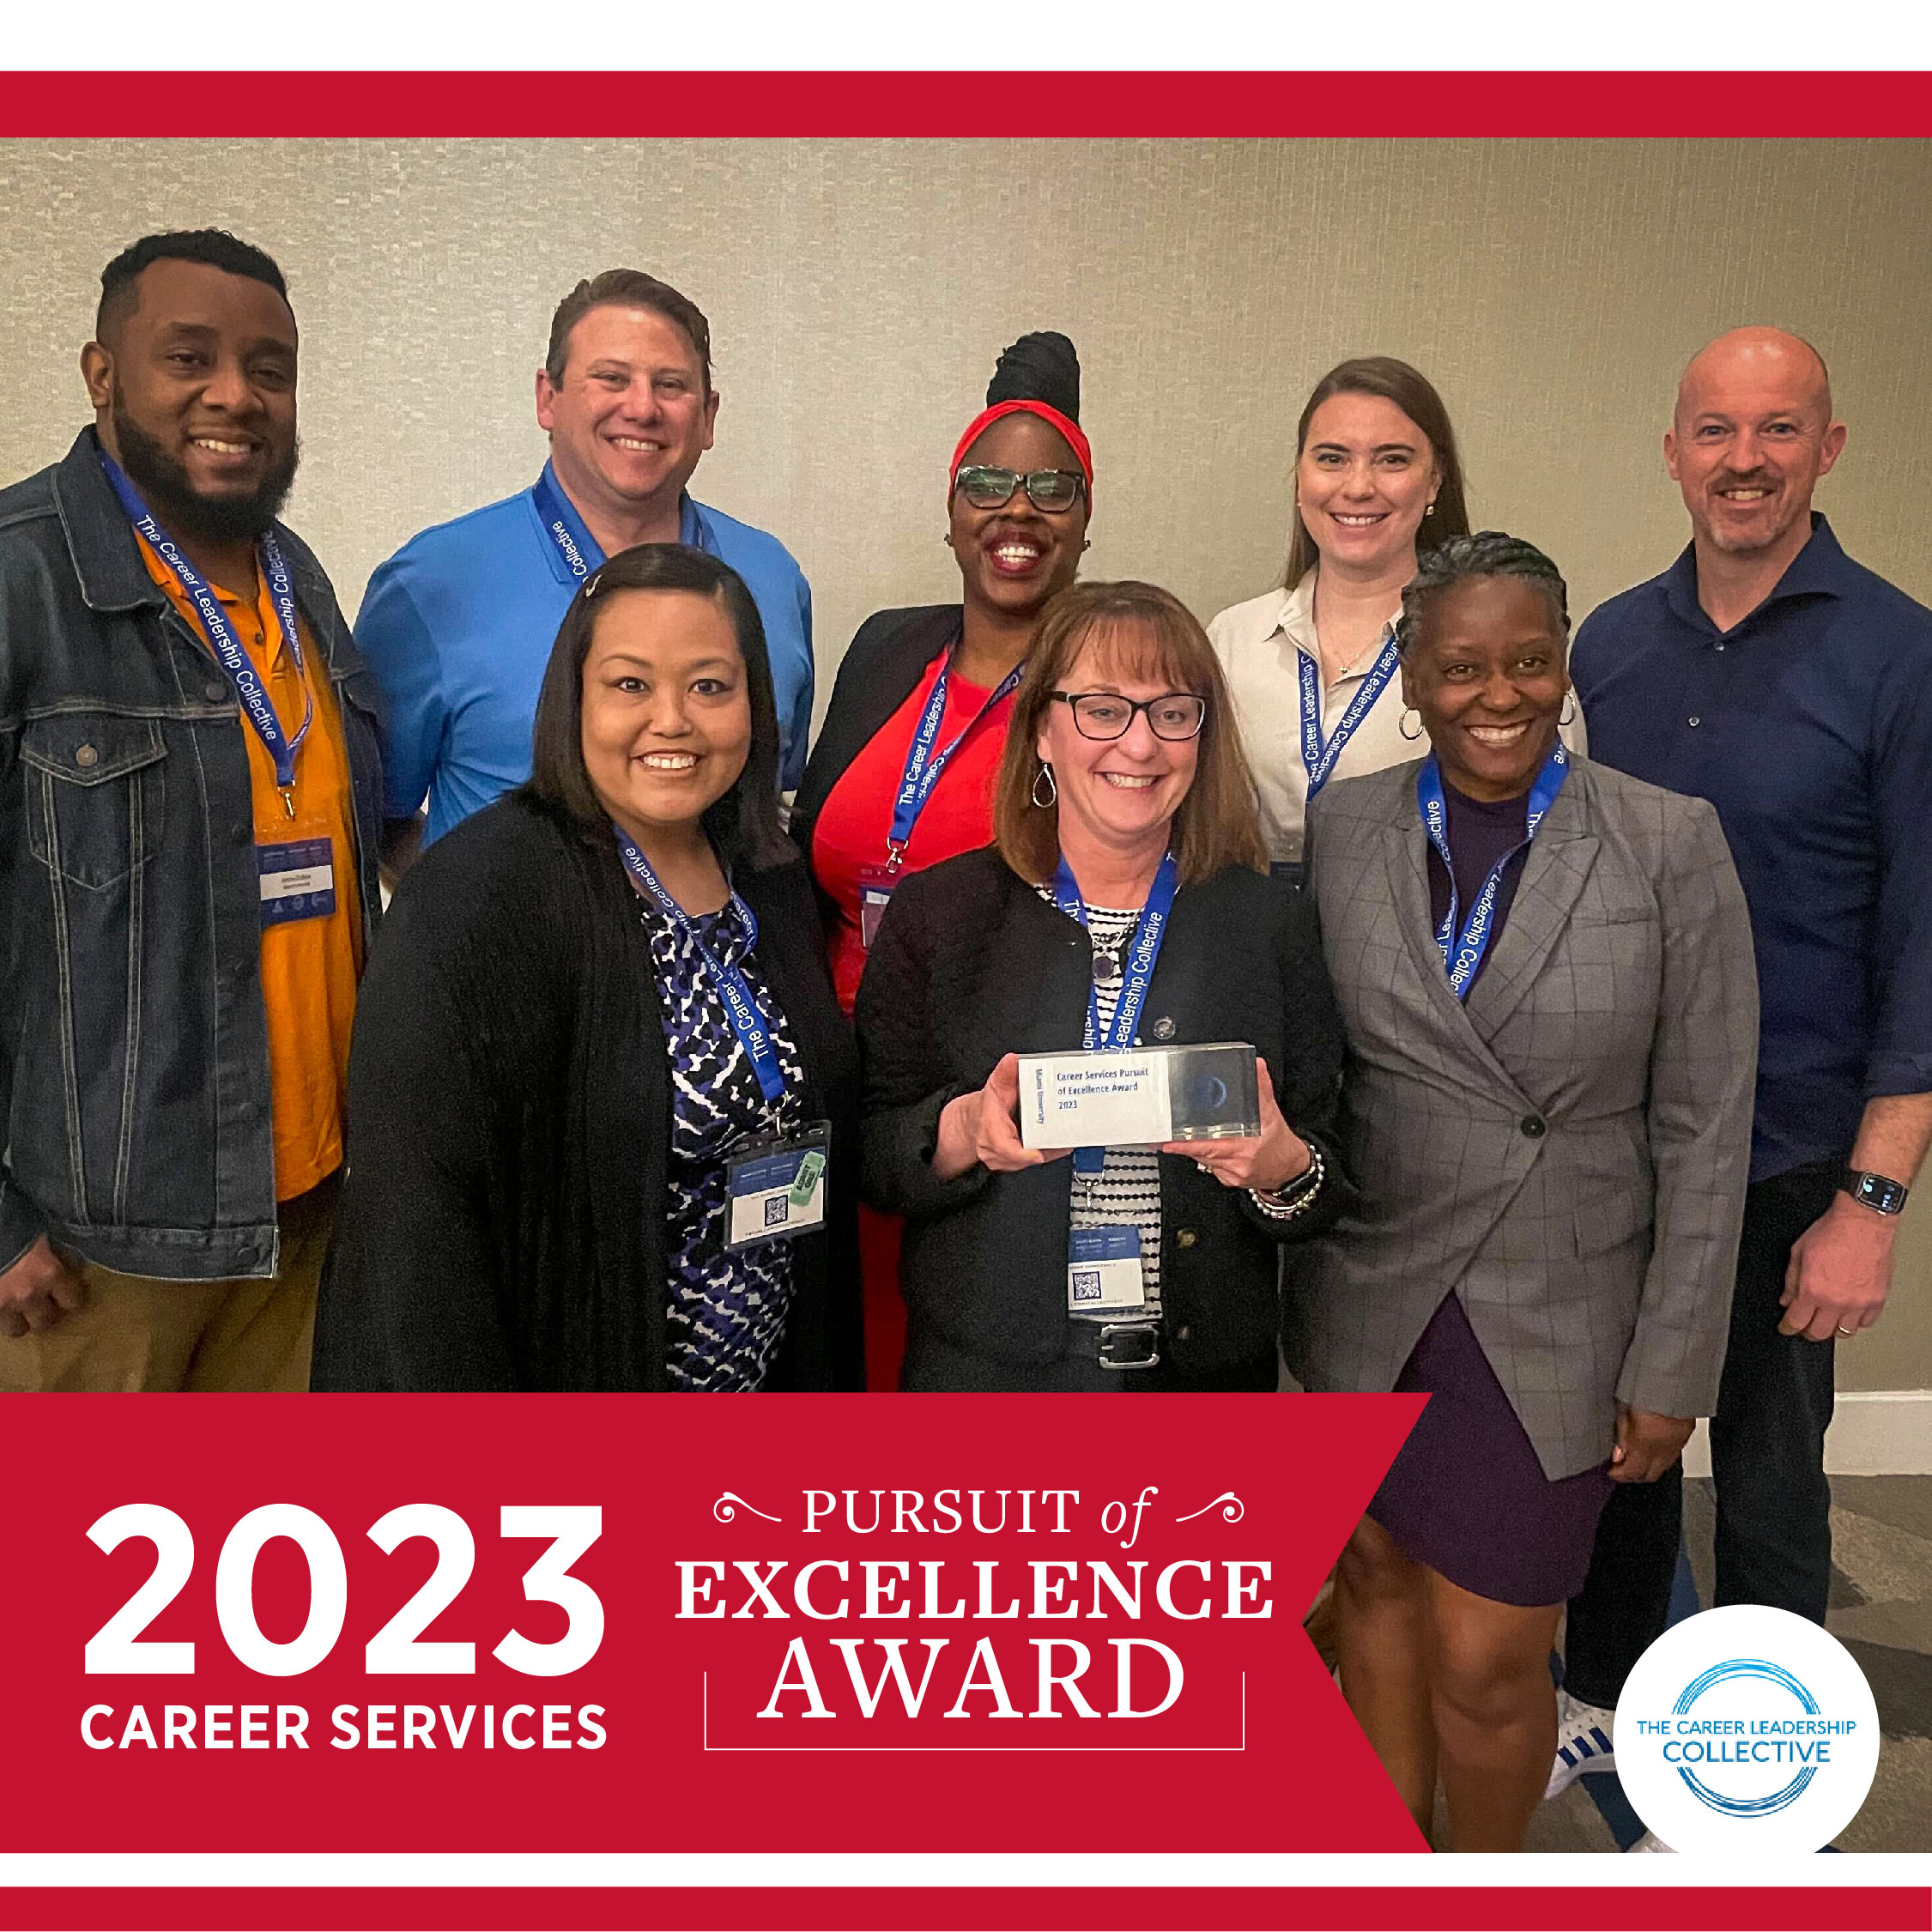  Miami Career Center Staff win the Pursuit of Excellence Award from the Career Leadership Collective